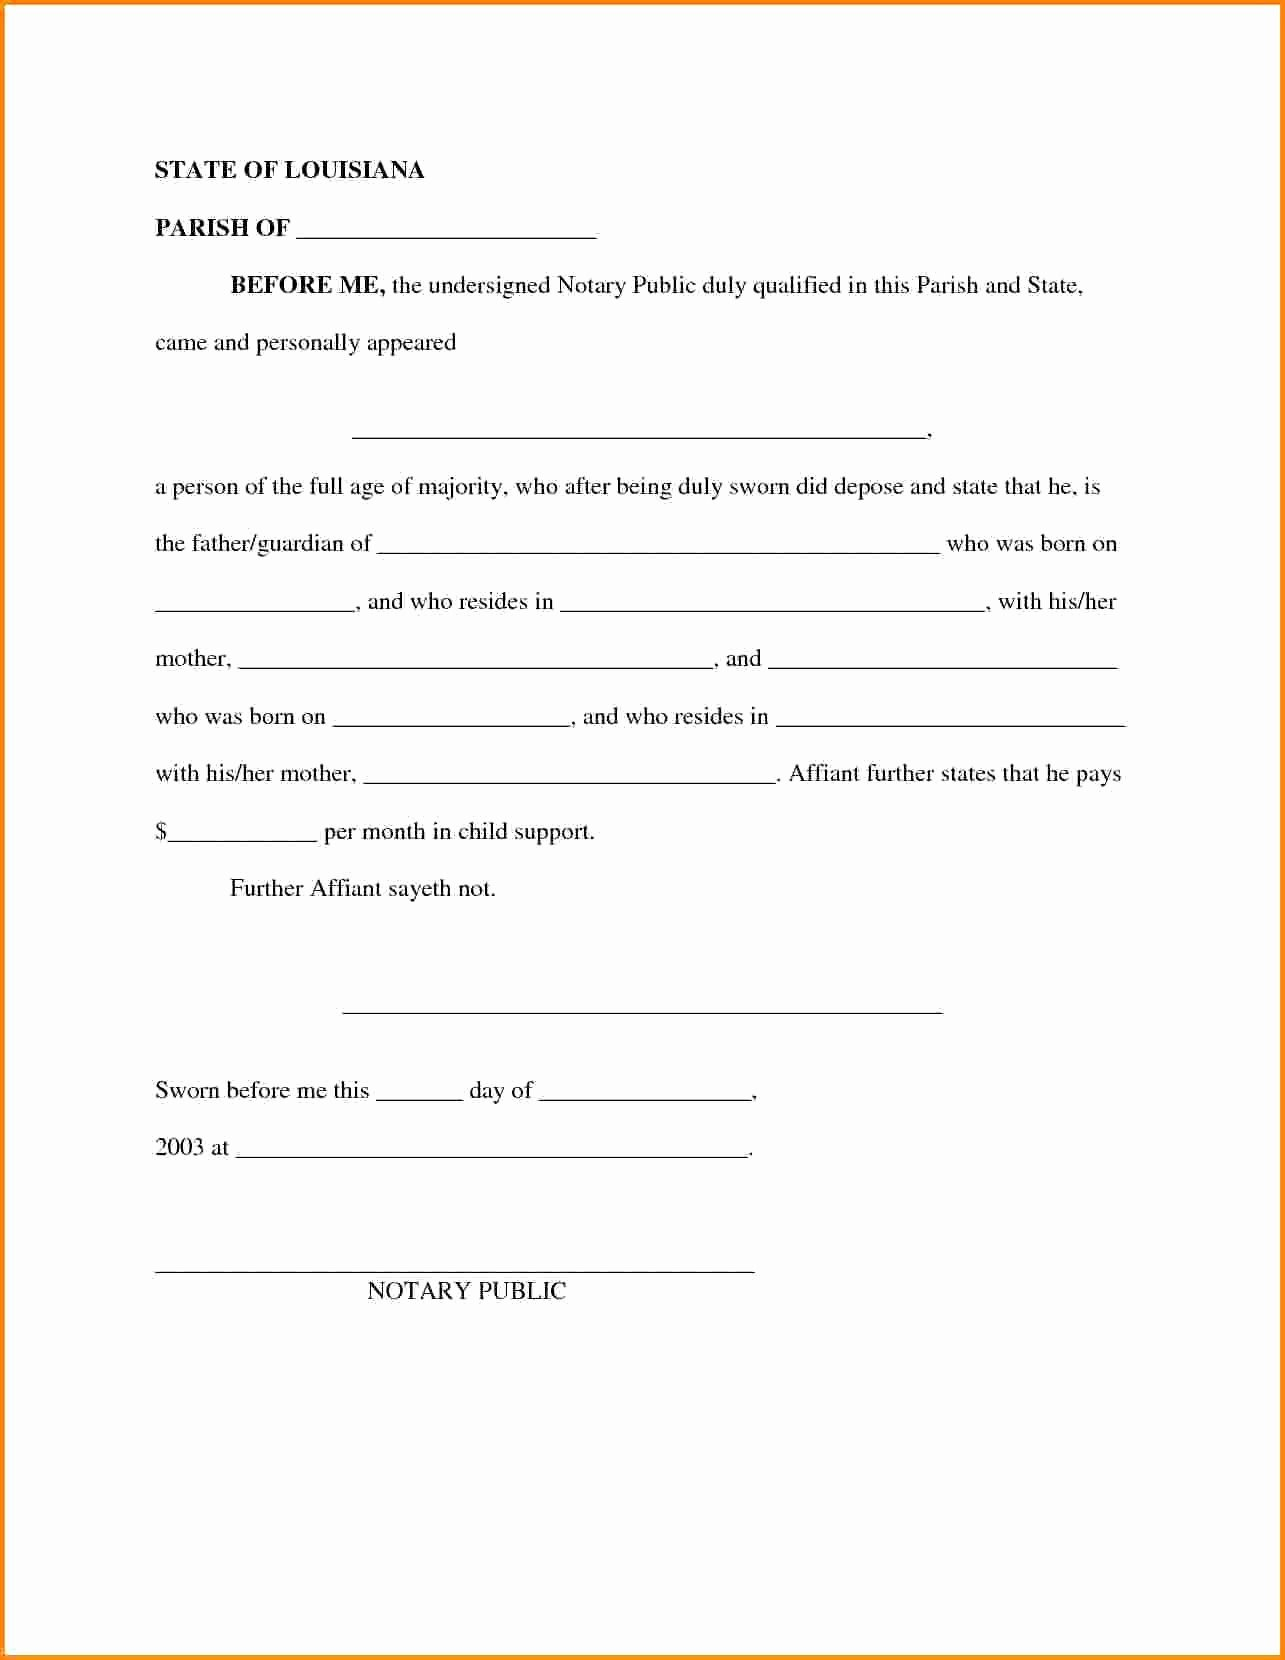 Notarized Child Support Agreement Sample  Lera Mera with regard to Notarized Child Support Agreement Template